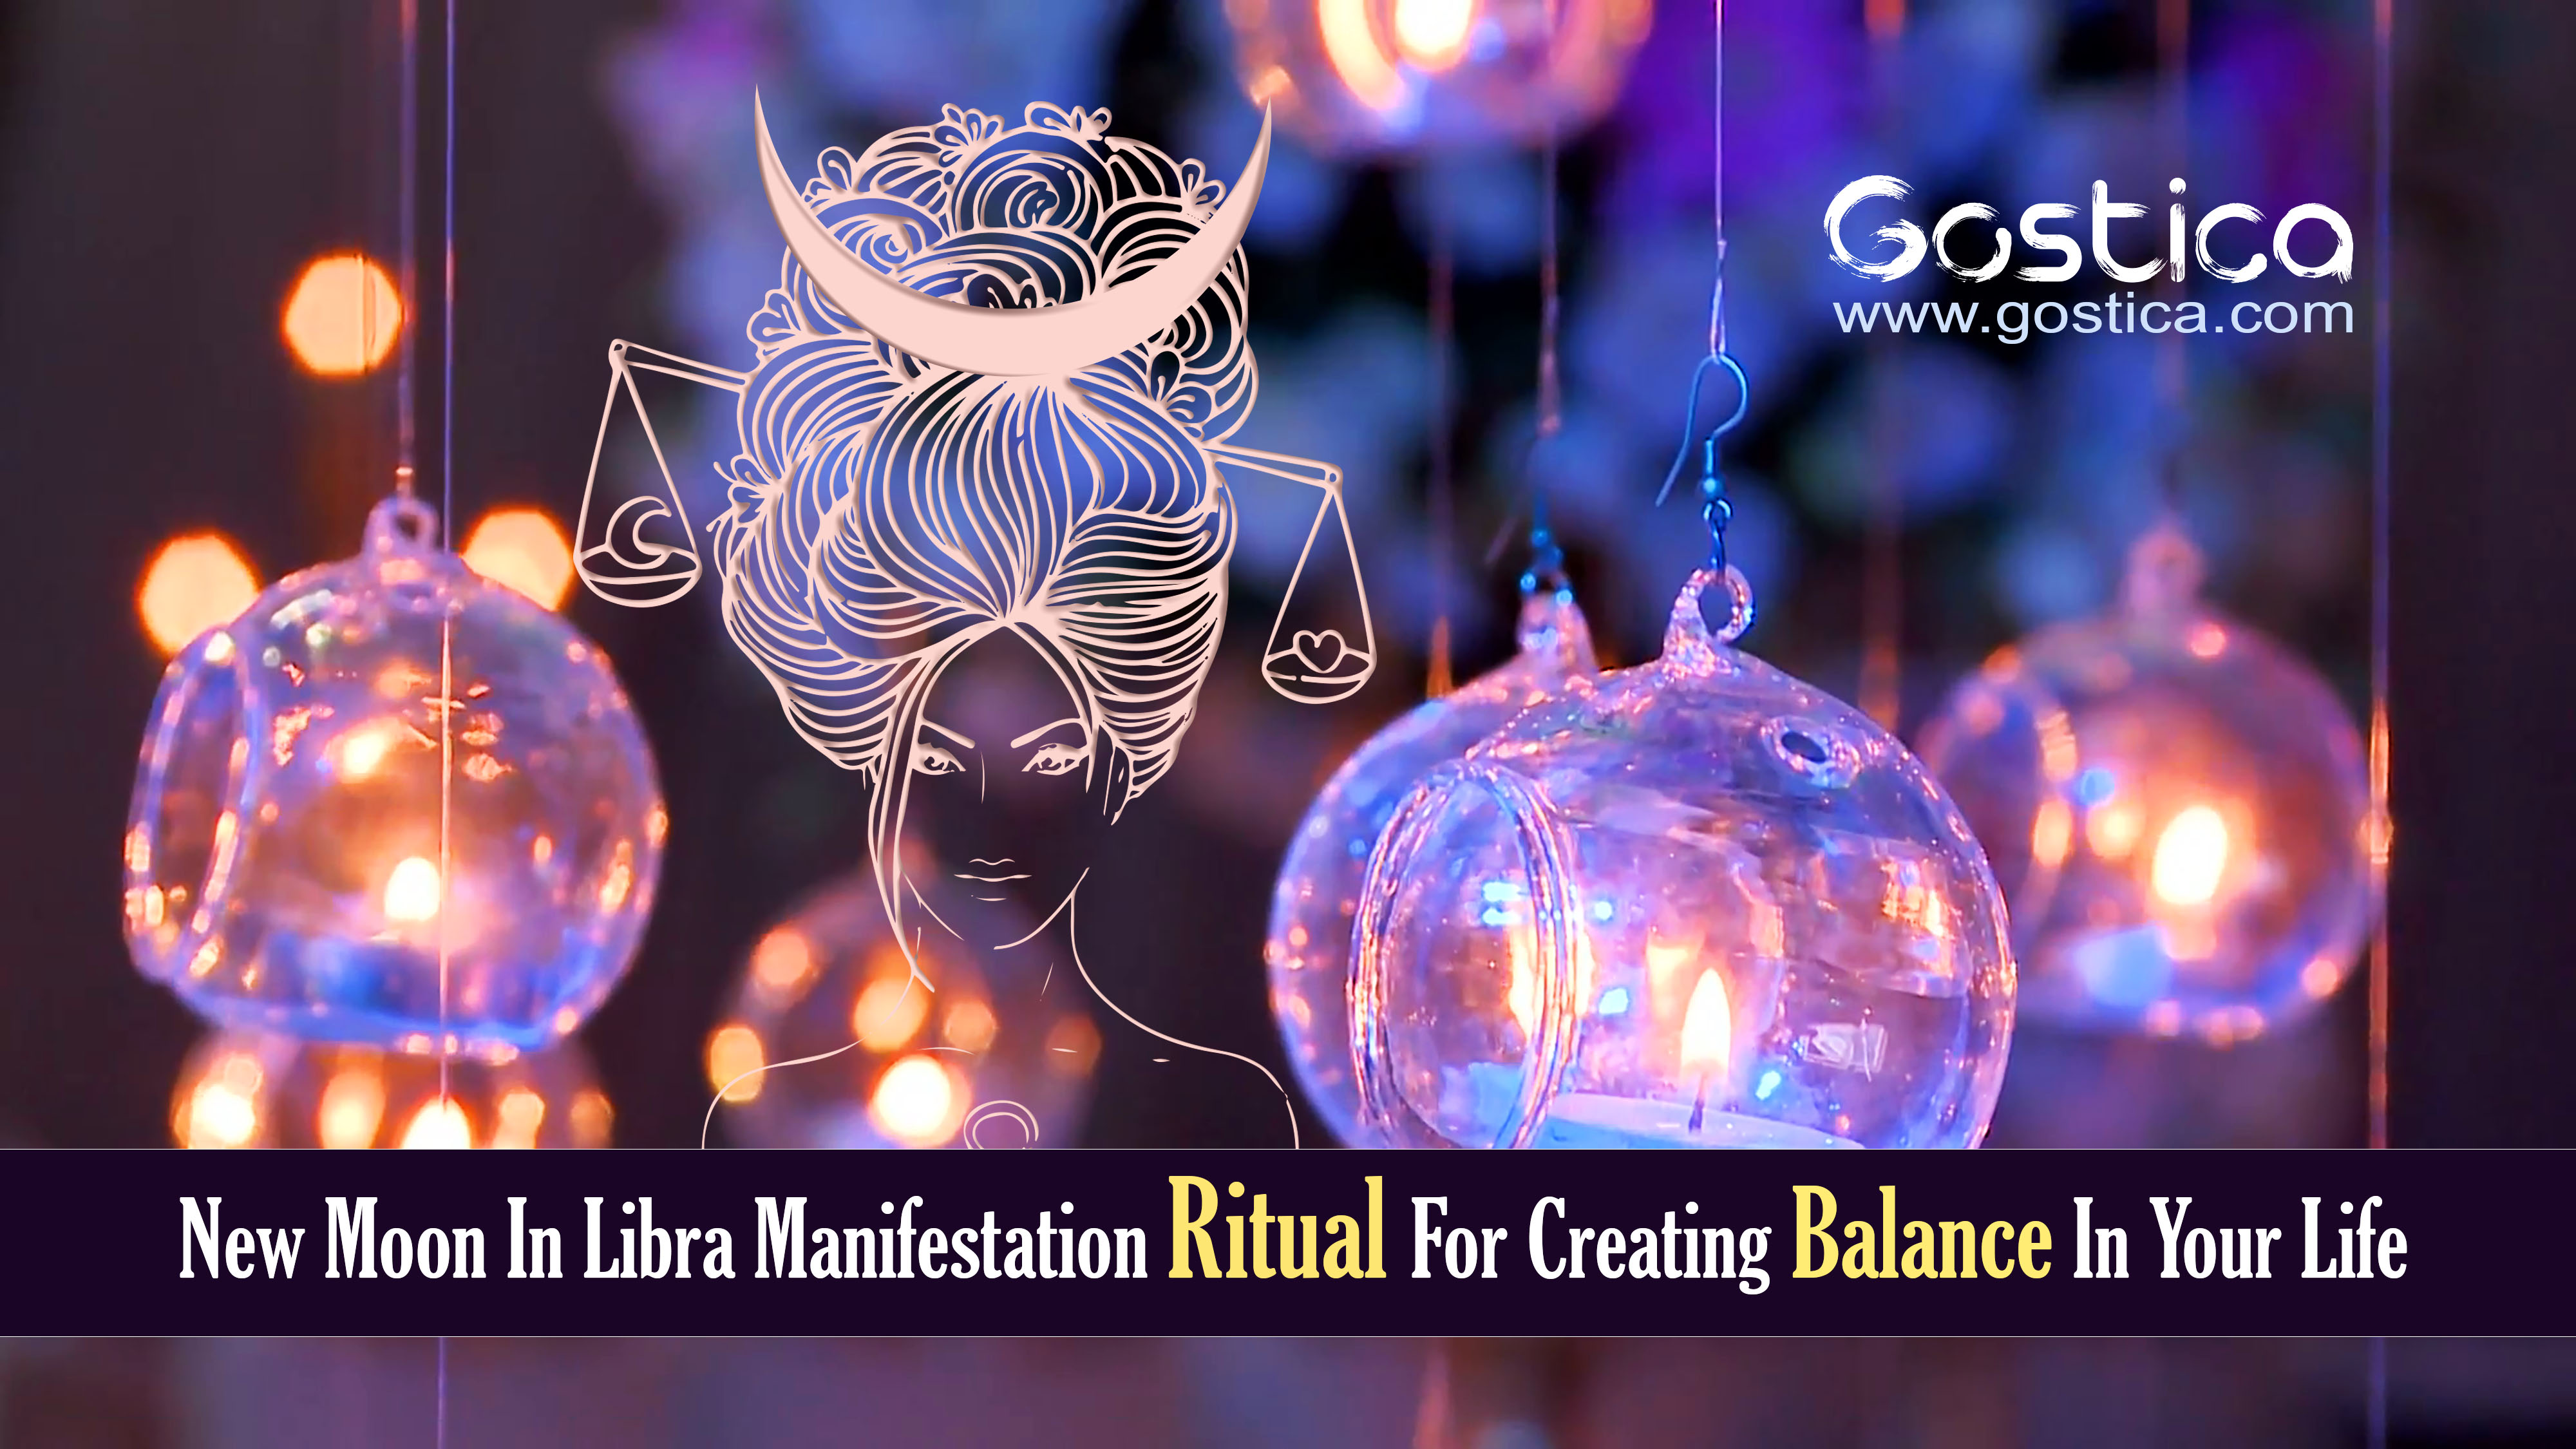 New-Moon-In-Libra-Manifestation-Ritual-For-Creating-Balance-In-Your-Life-.jpg